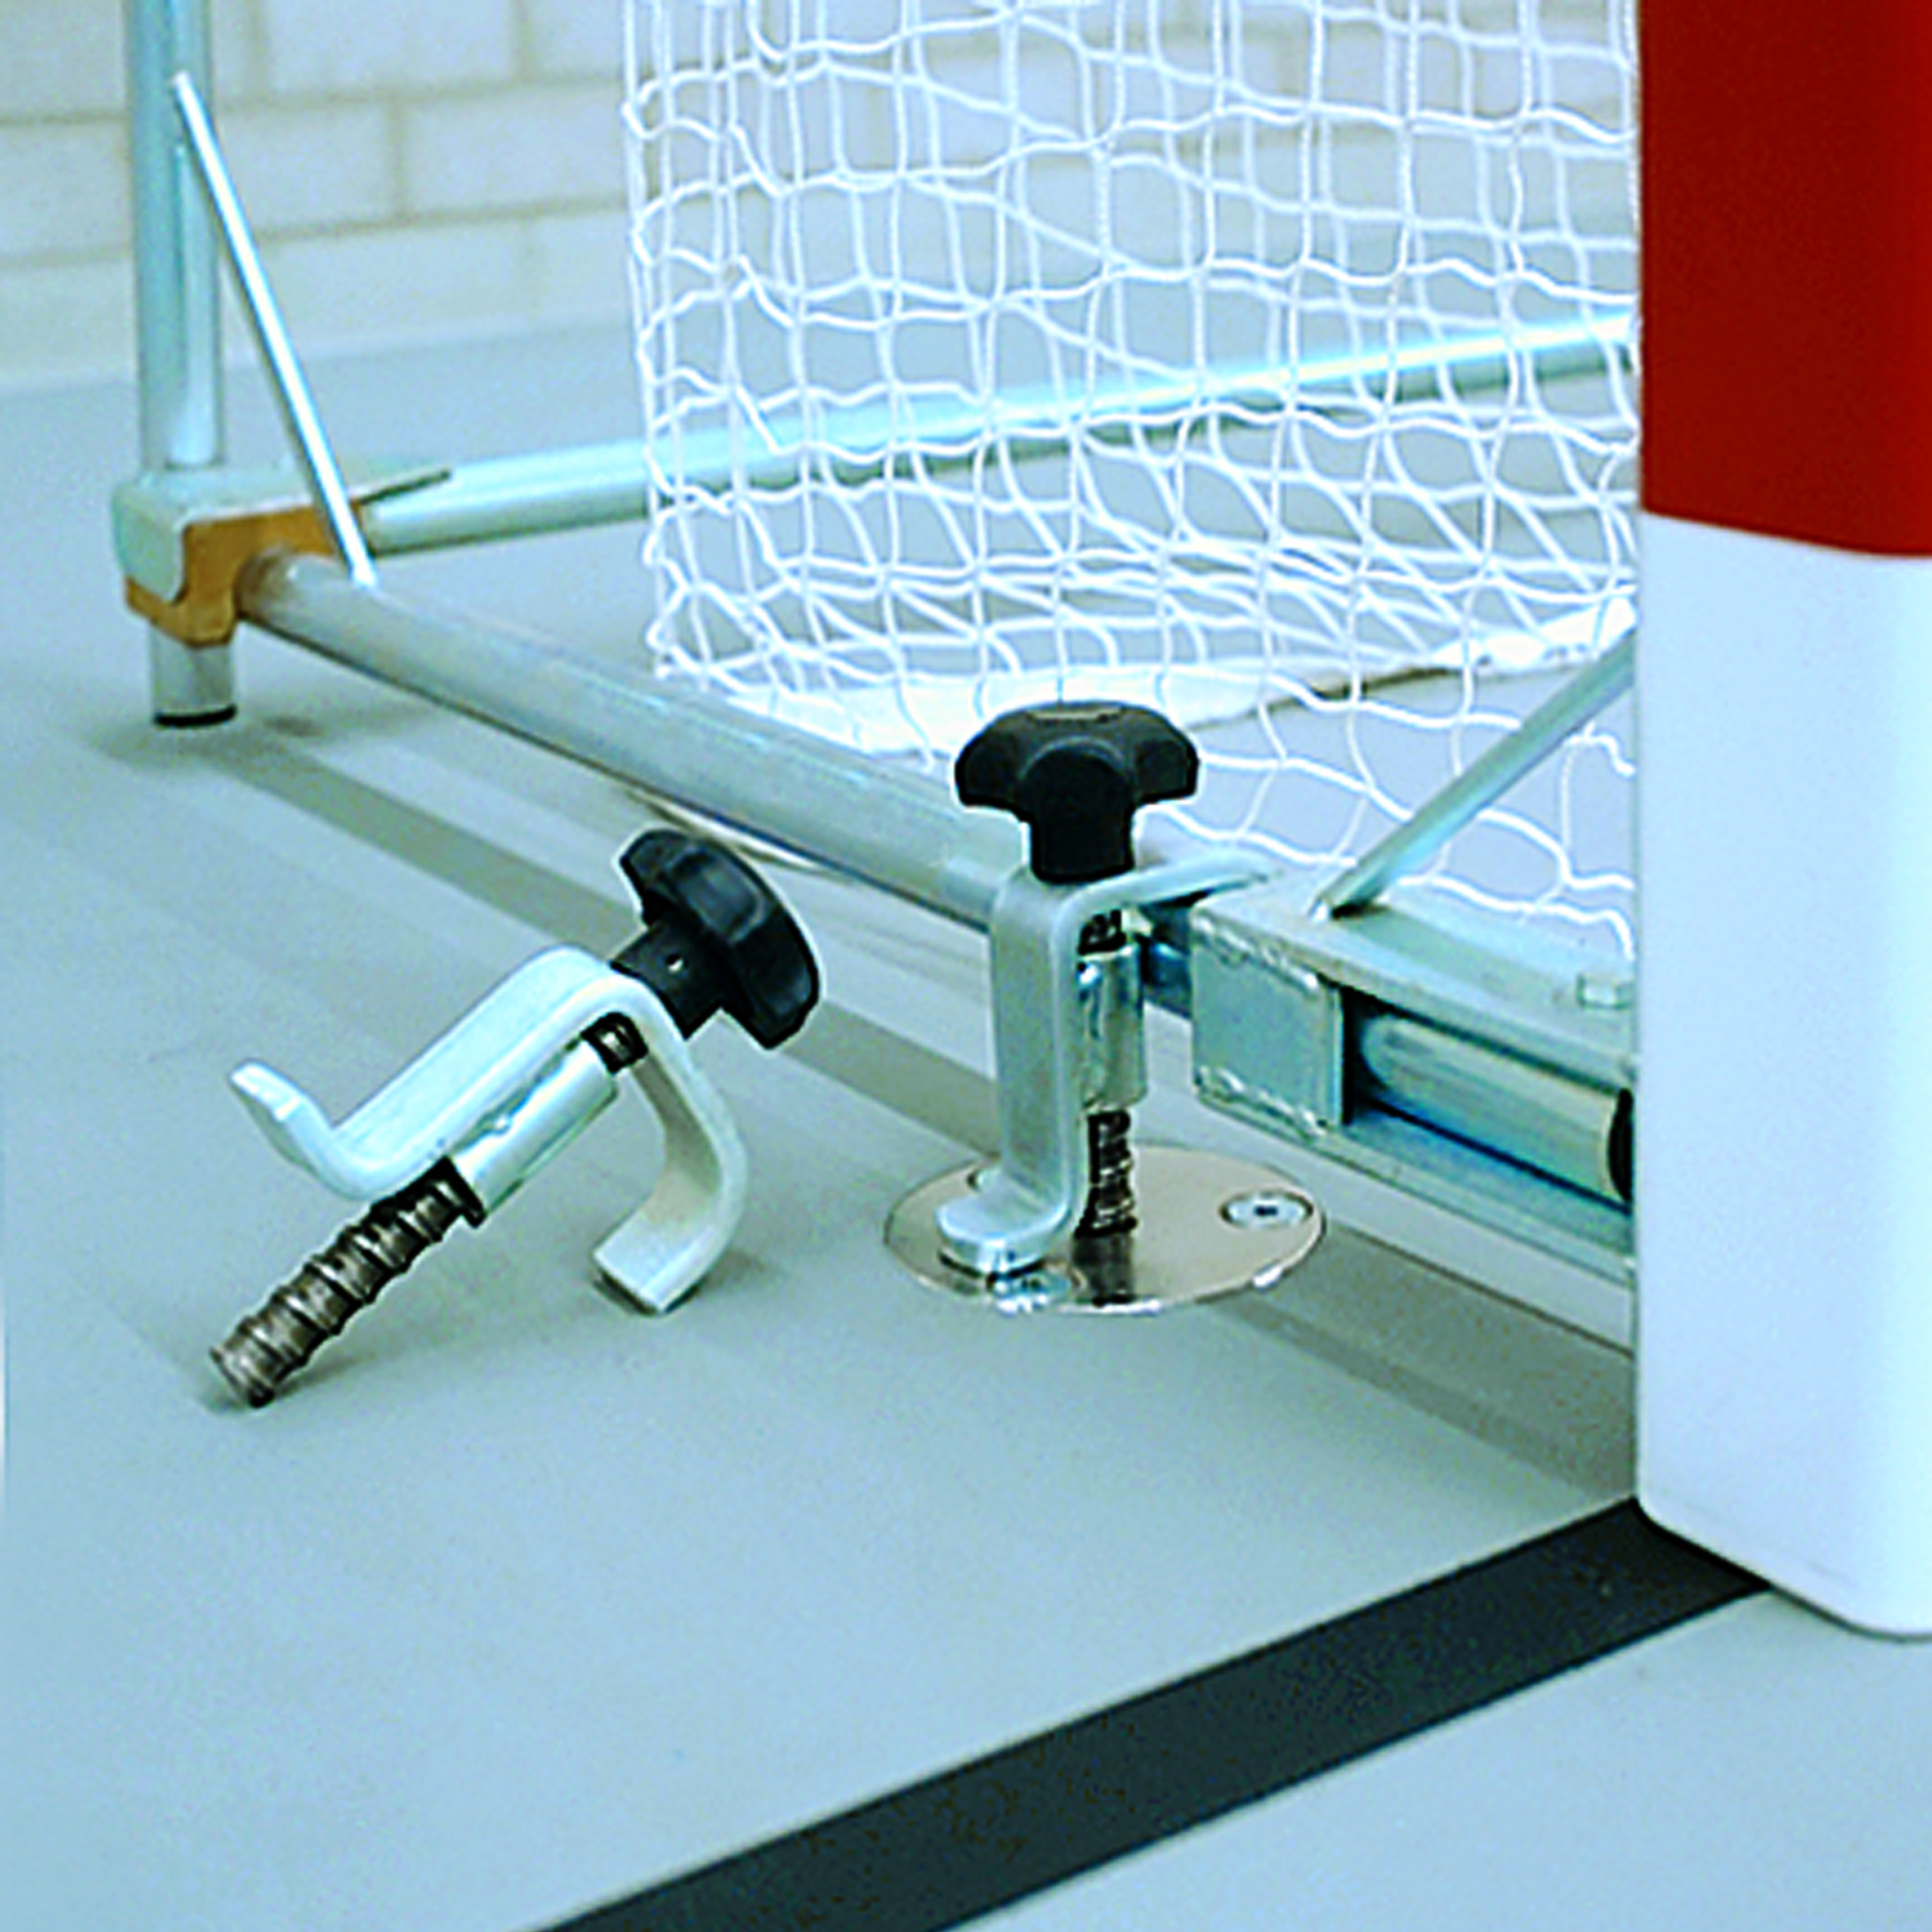 Quick-tightening floor fixation for handball goals with separate rear bar